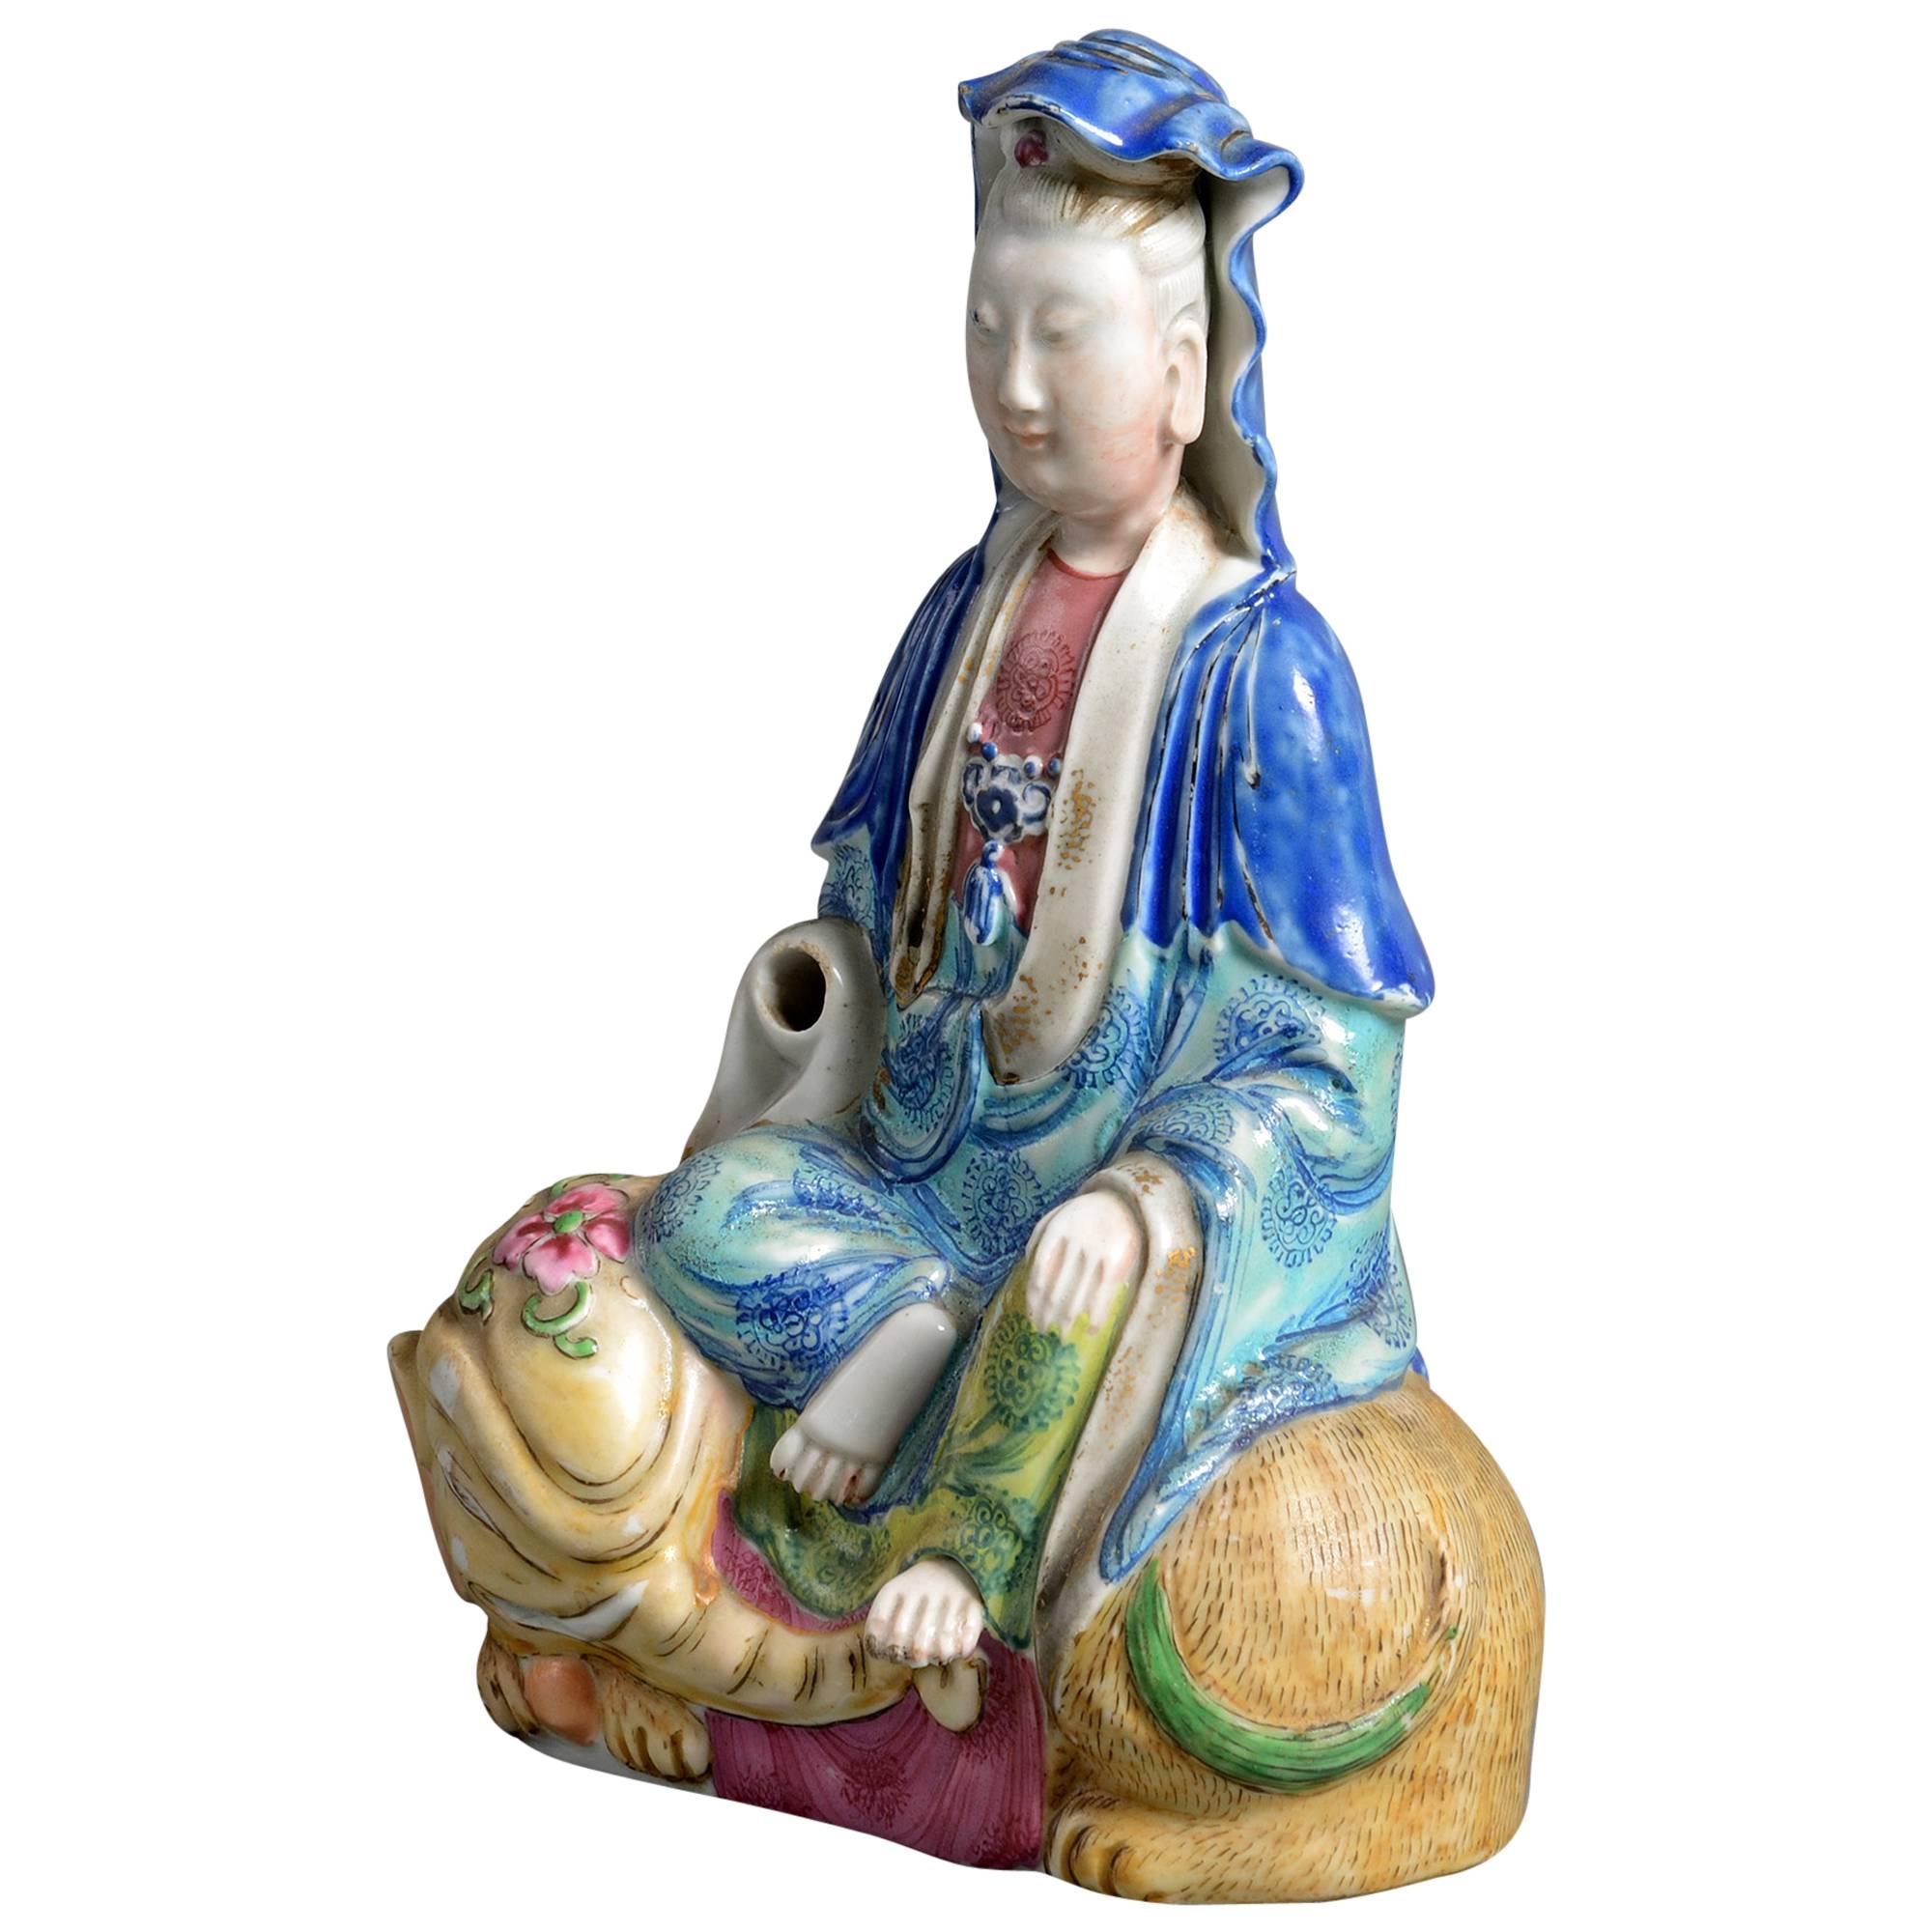 19th Century Porcelain Figure of a Figure Seated Upon an Elephant